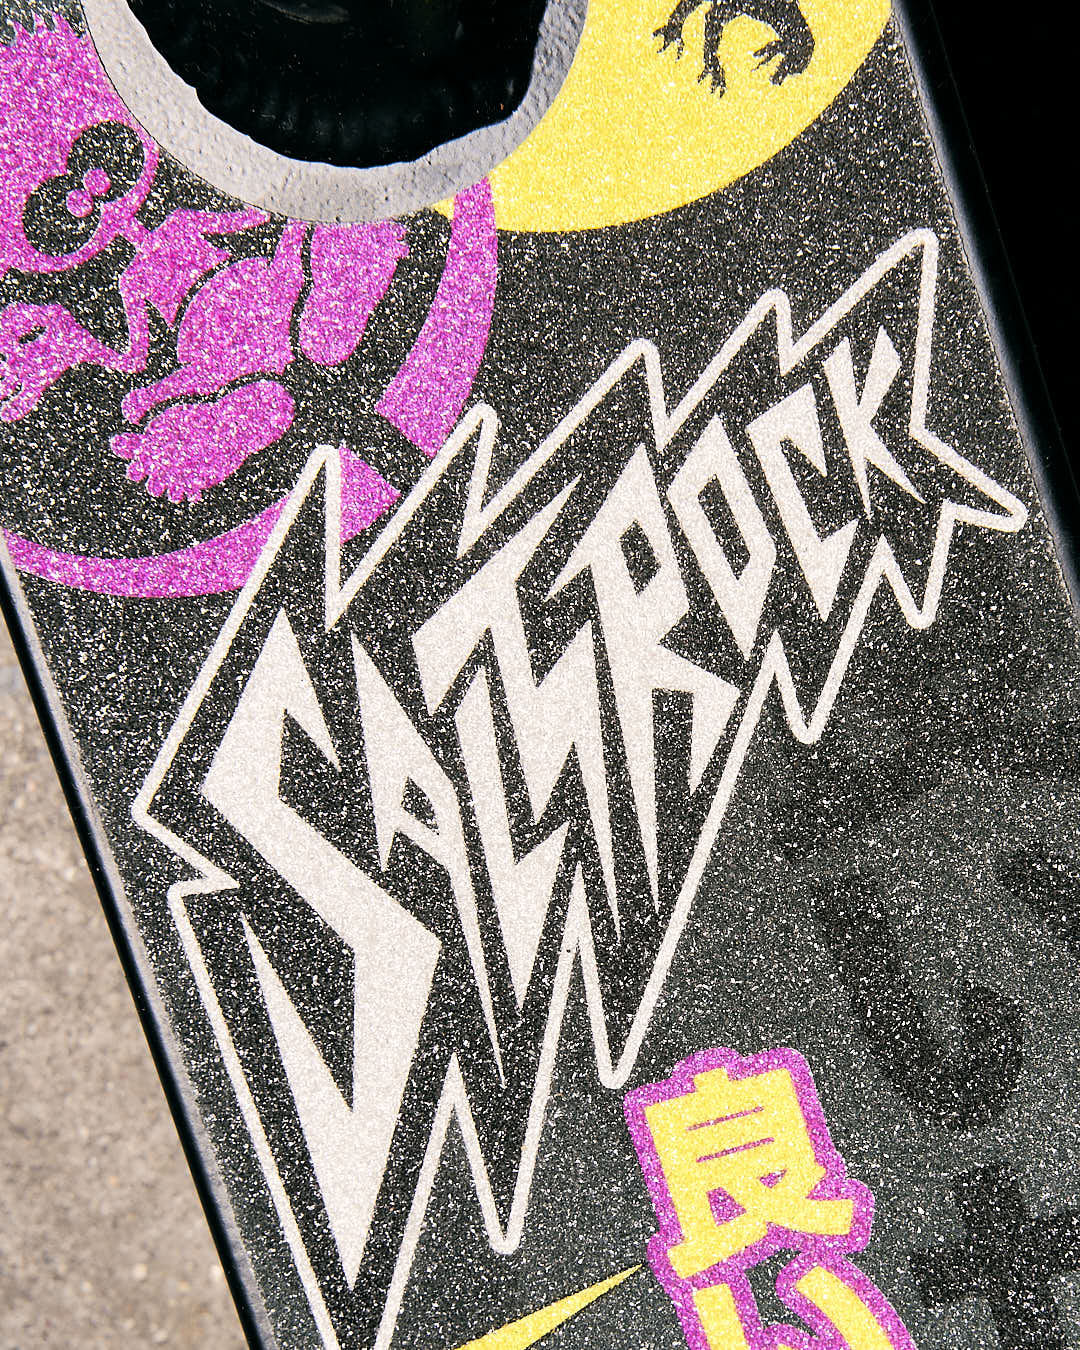 A Tokyo Smackdown - Stunt Scooter - Black with the brand name Saltrock on it.